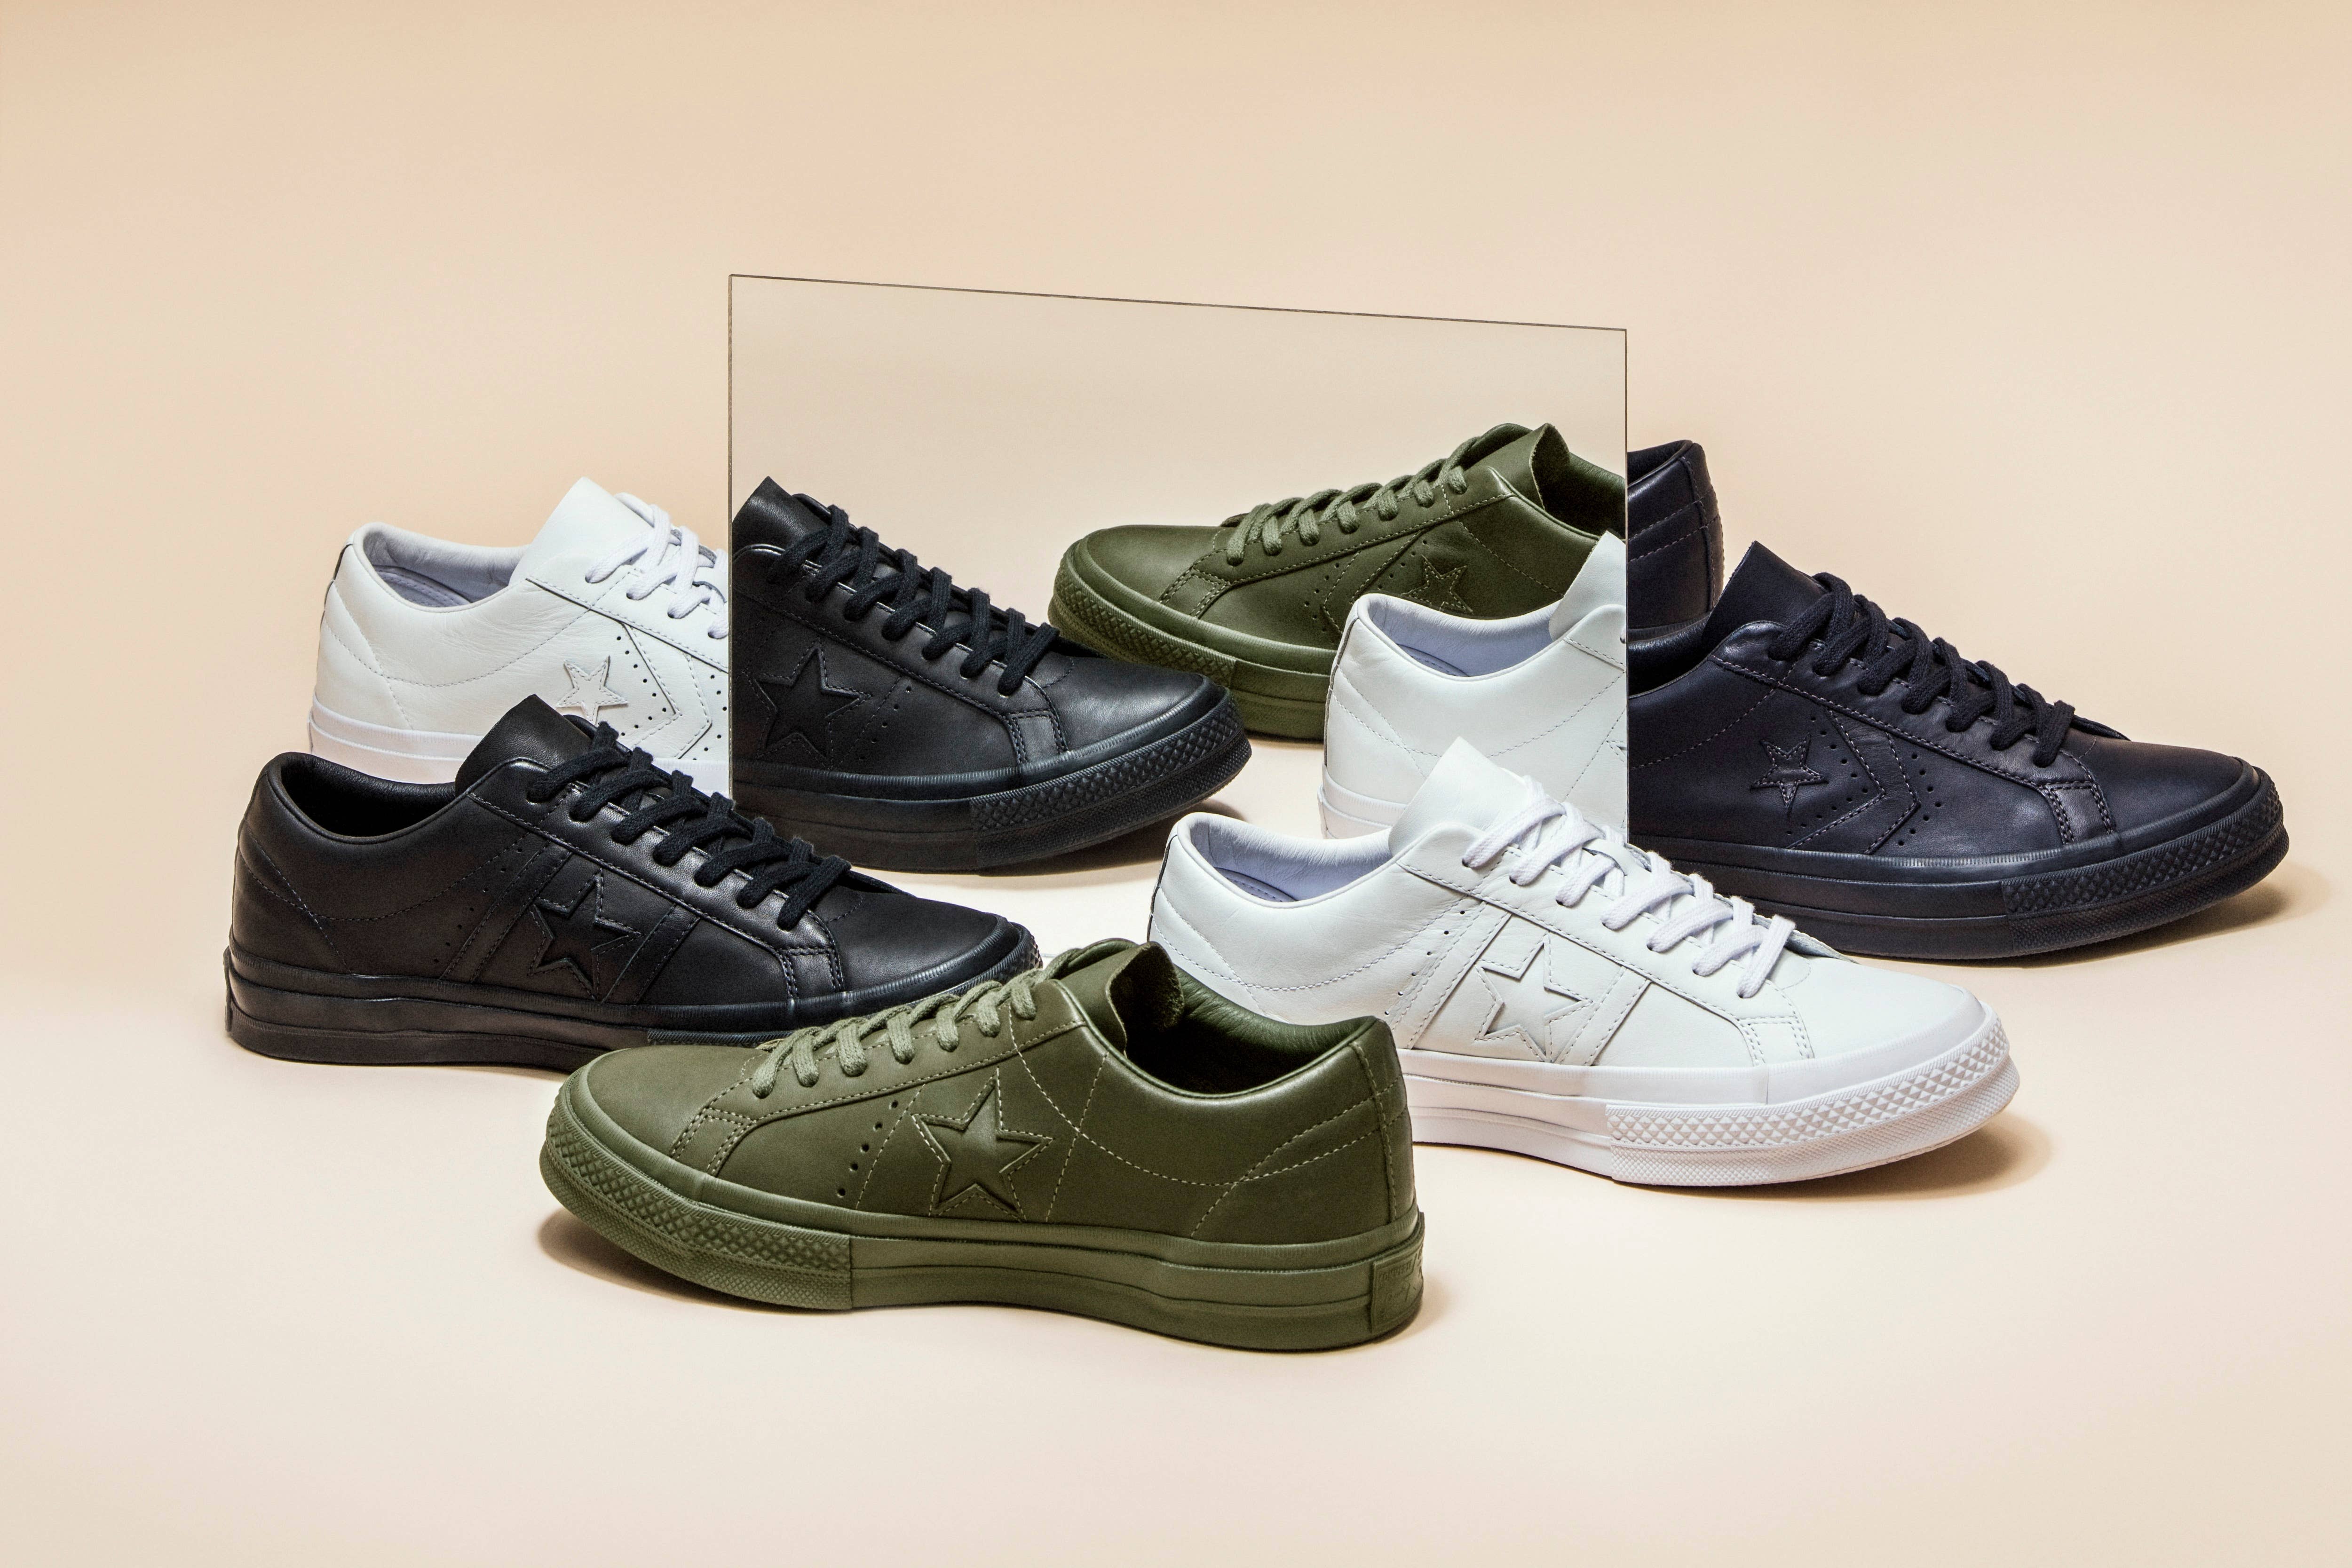 Converse x Engineered Garments One Star Collection